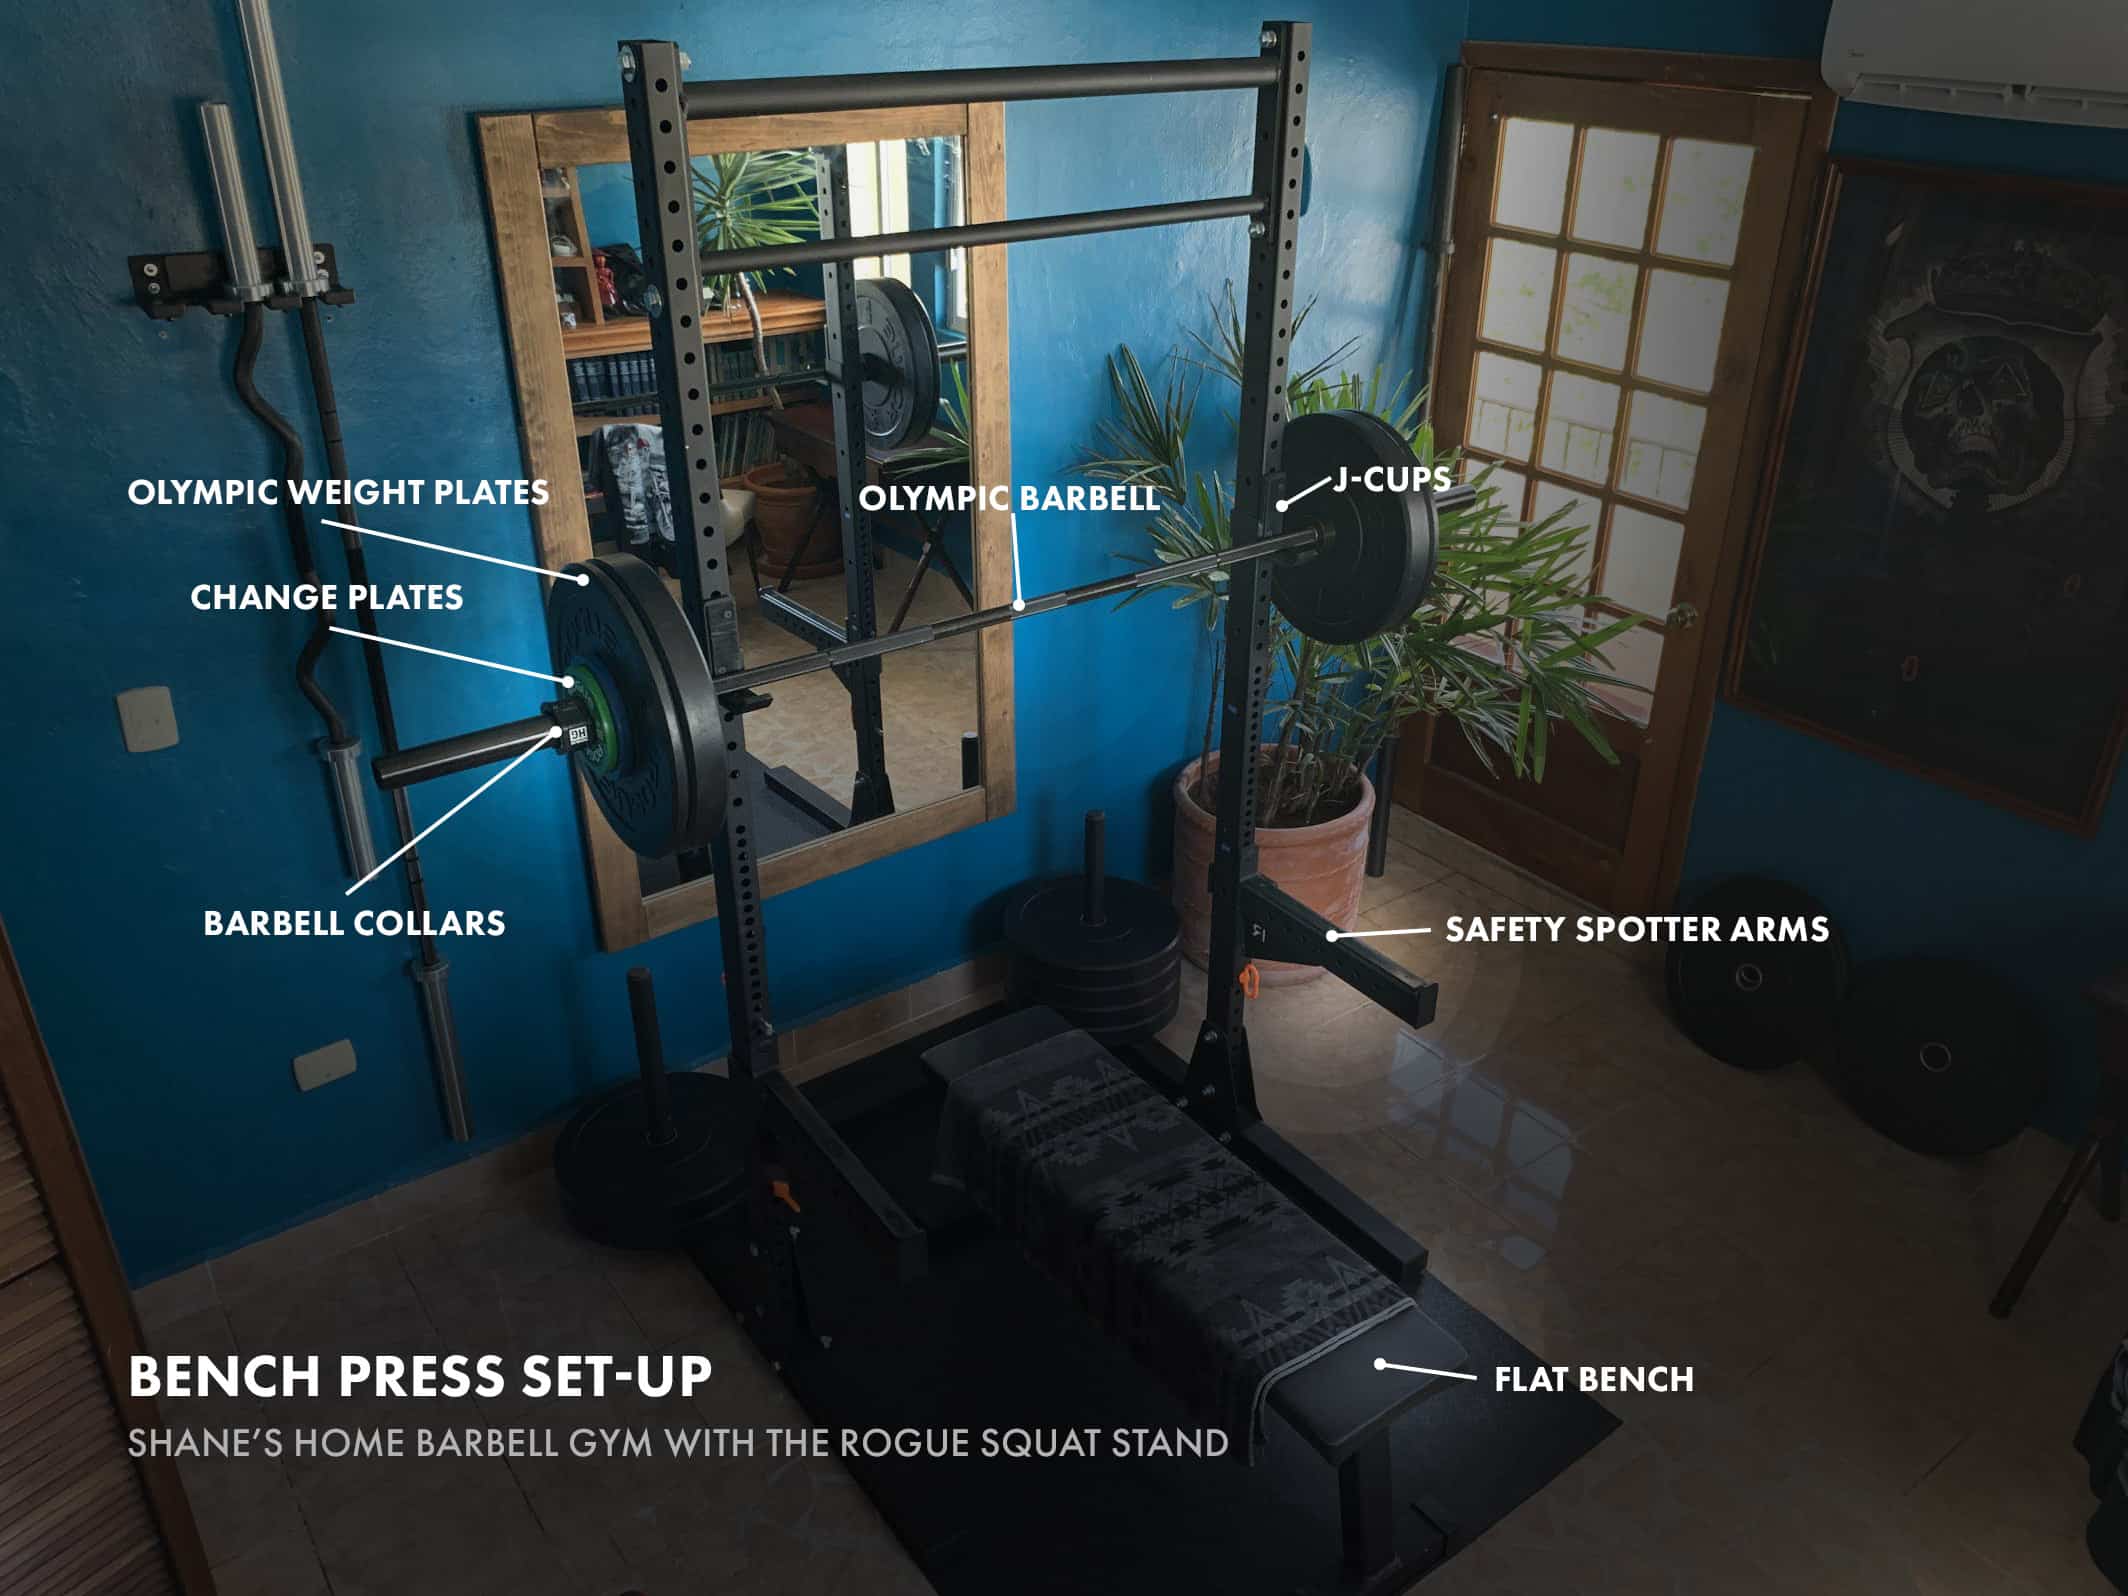 Bench Press Home Gym Set-up with Rogue Equipment—Barbell, J-cups, collars, flat bench, weights, etc.